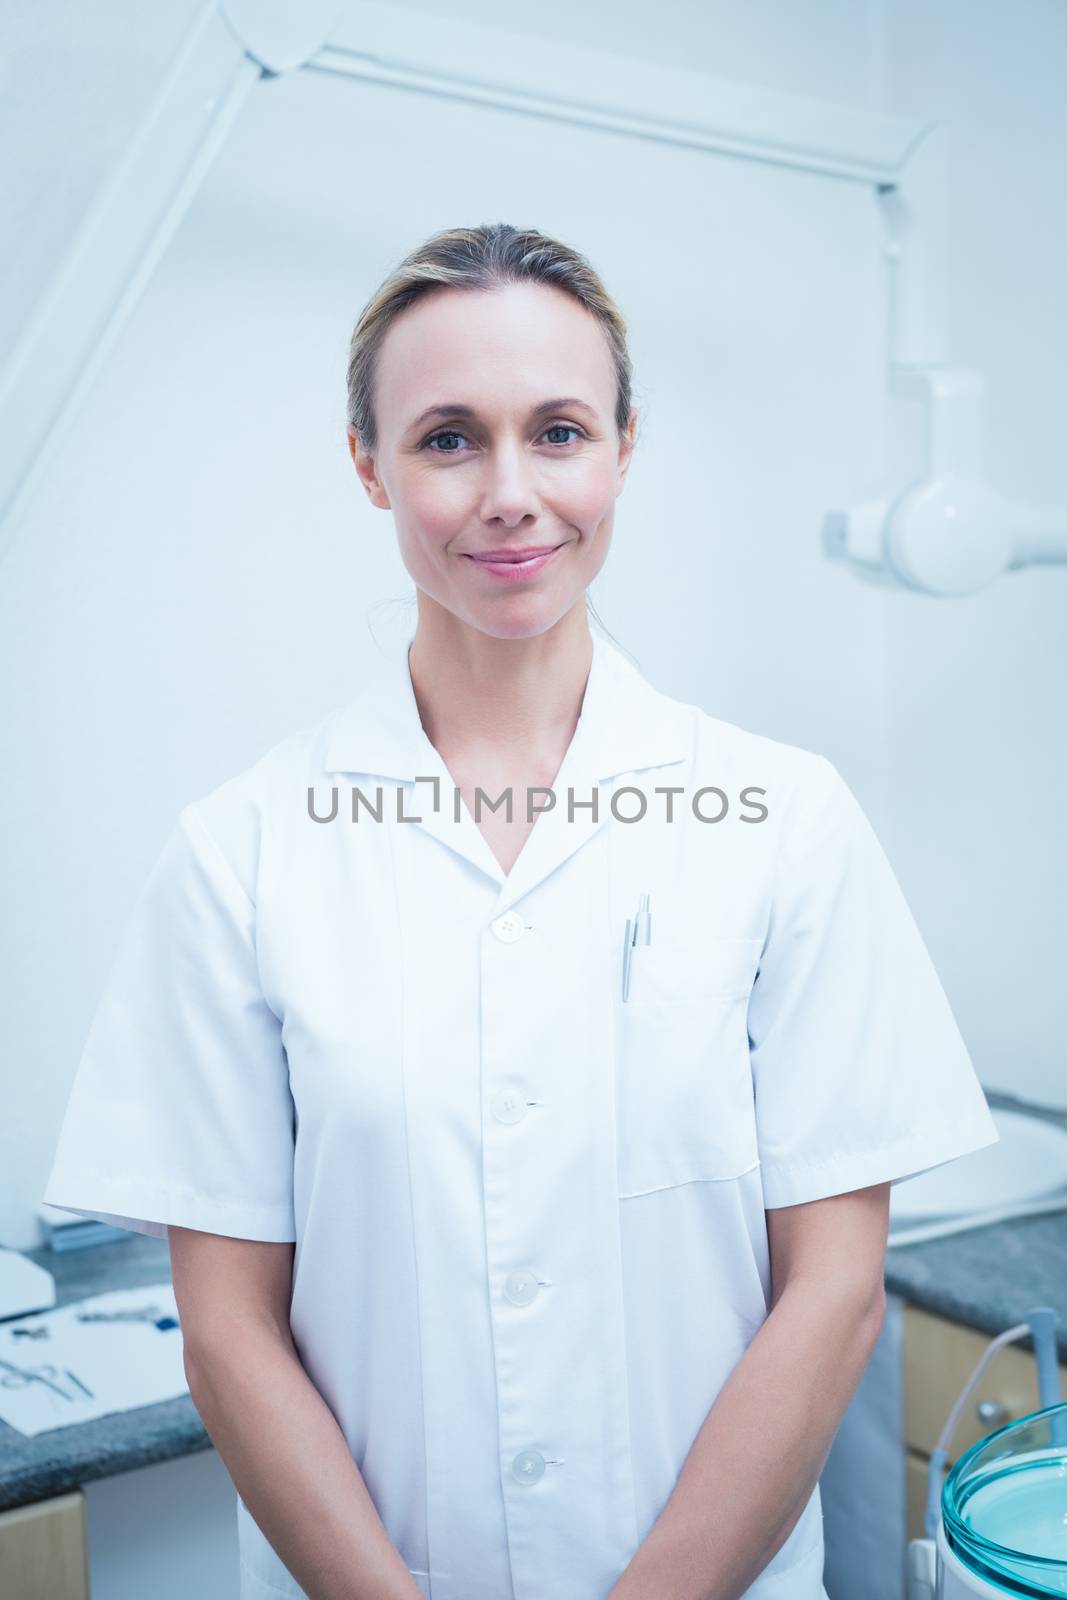 Portrait of smiling young female dentist